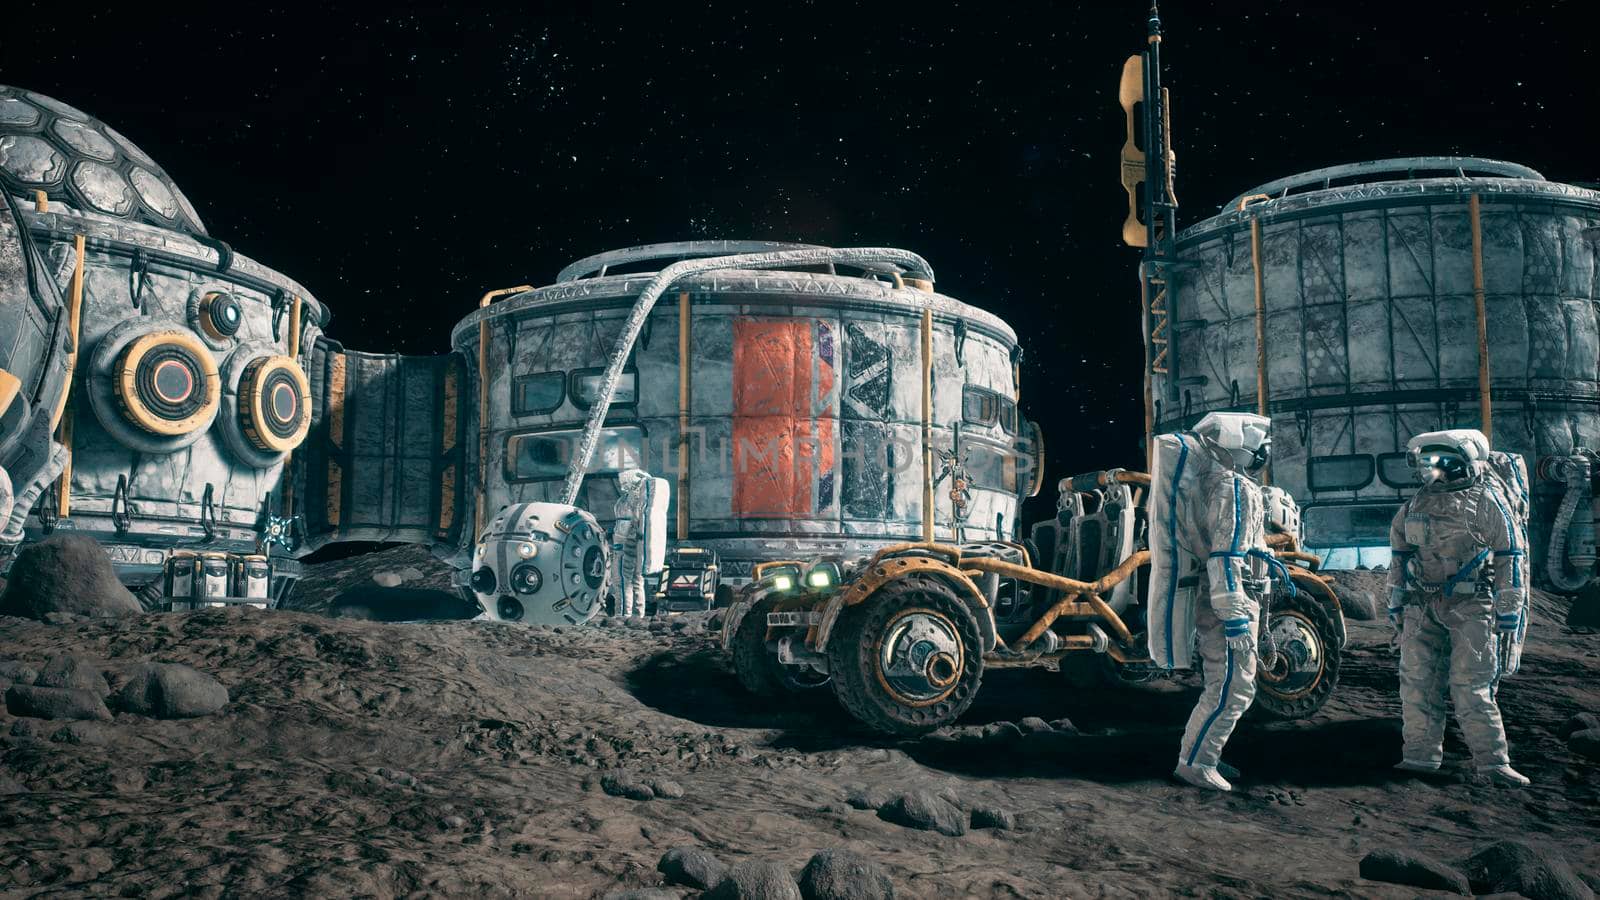 View of the lunar surface, lunar colony and astronauts working at the space base next to the lunar rover. View of the future lunar base.